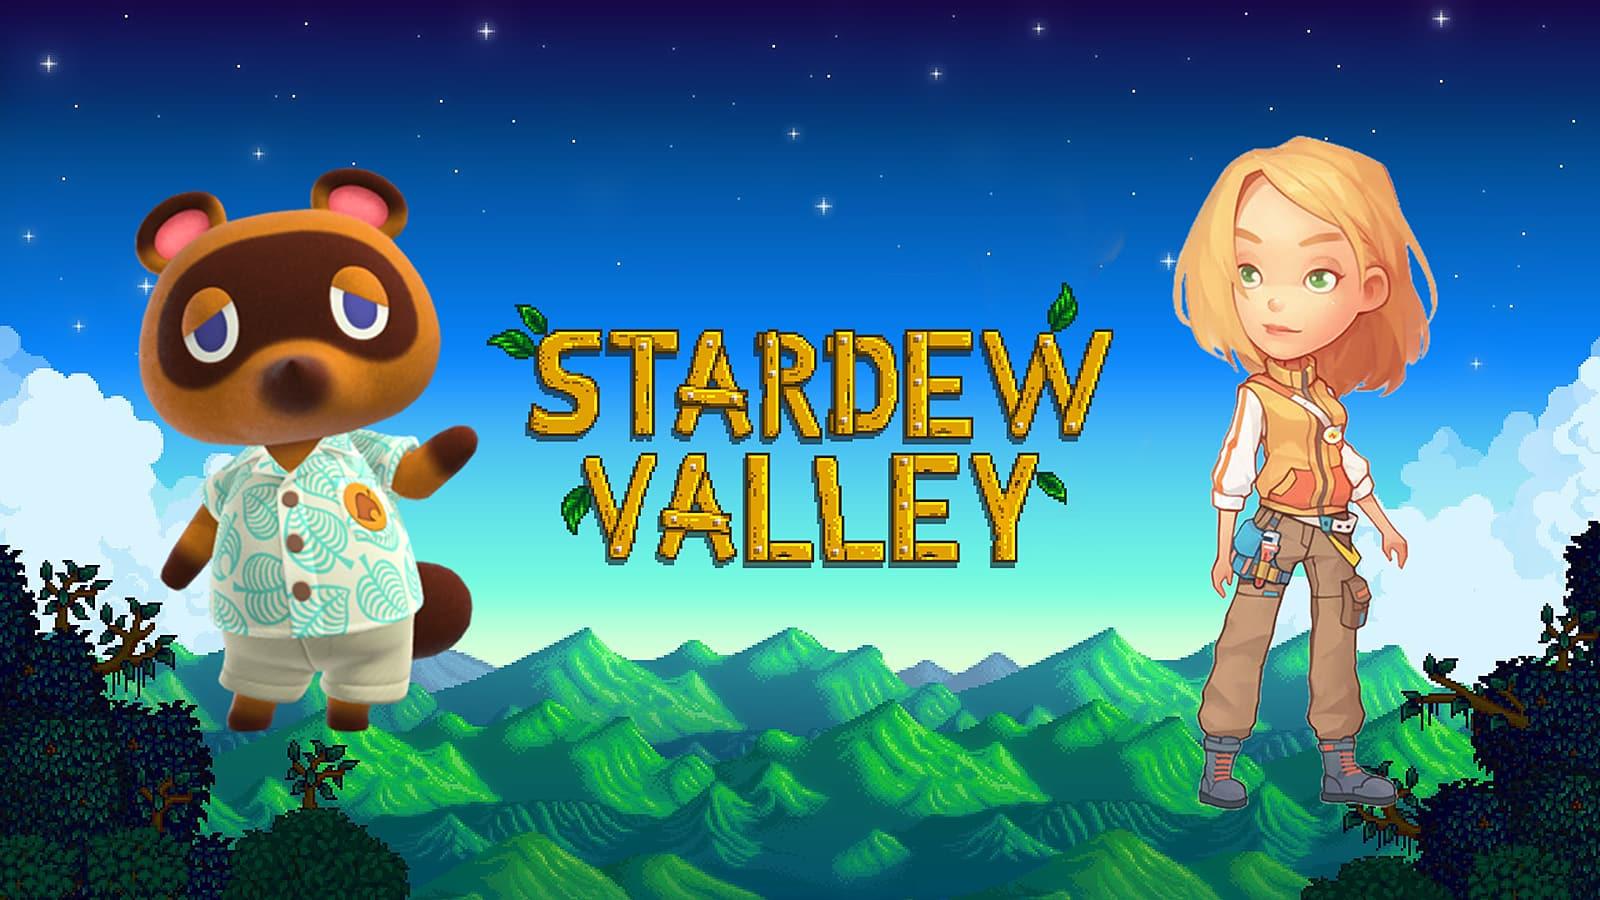 An image of Stardew Valley logo with Nook and a My Time in Portia character